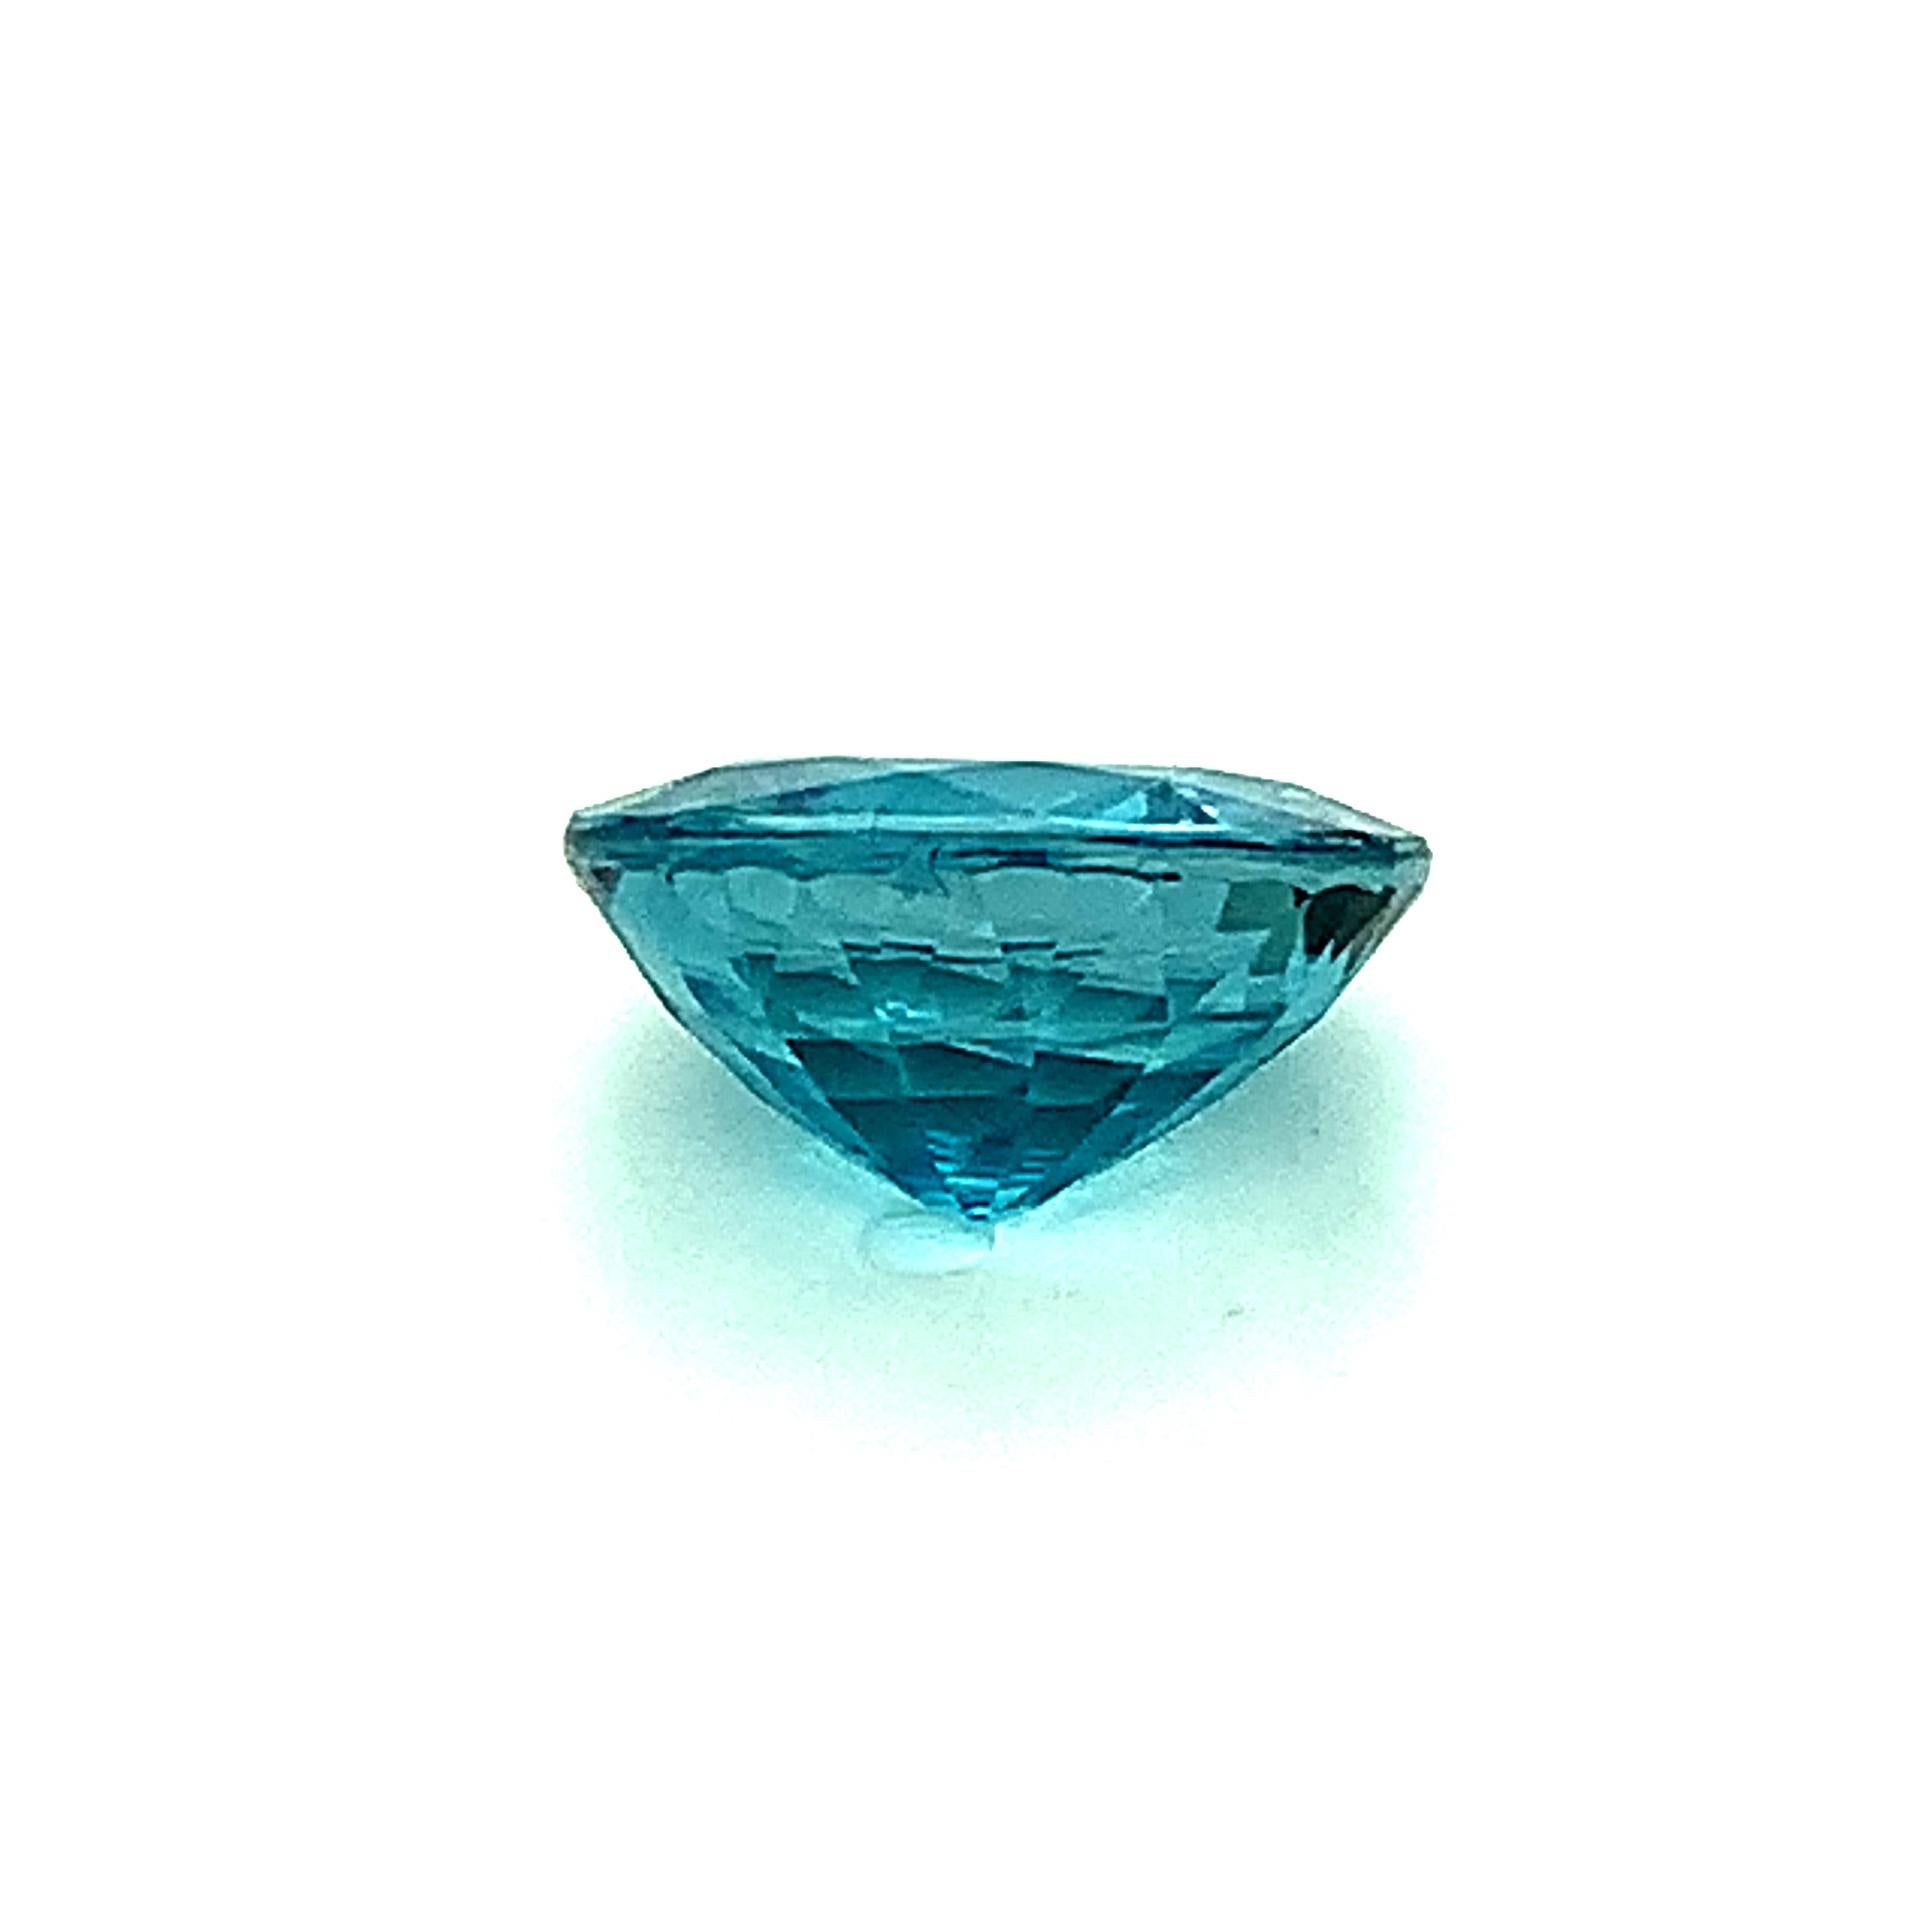 10.18 Carat Round Blue Zircon, Unset Loose Gemstone   In New Condition For Sale In Los Angeles, CA